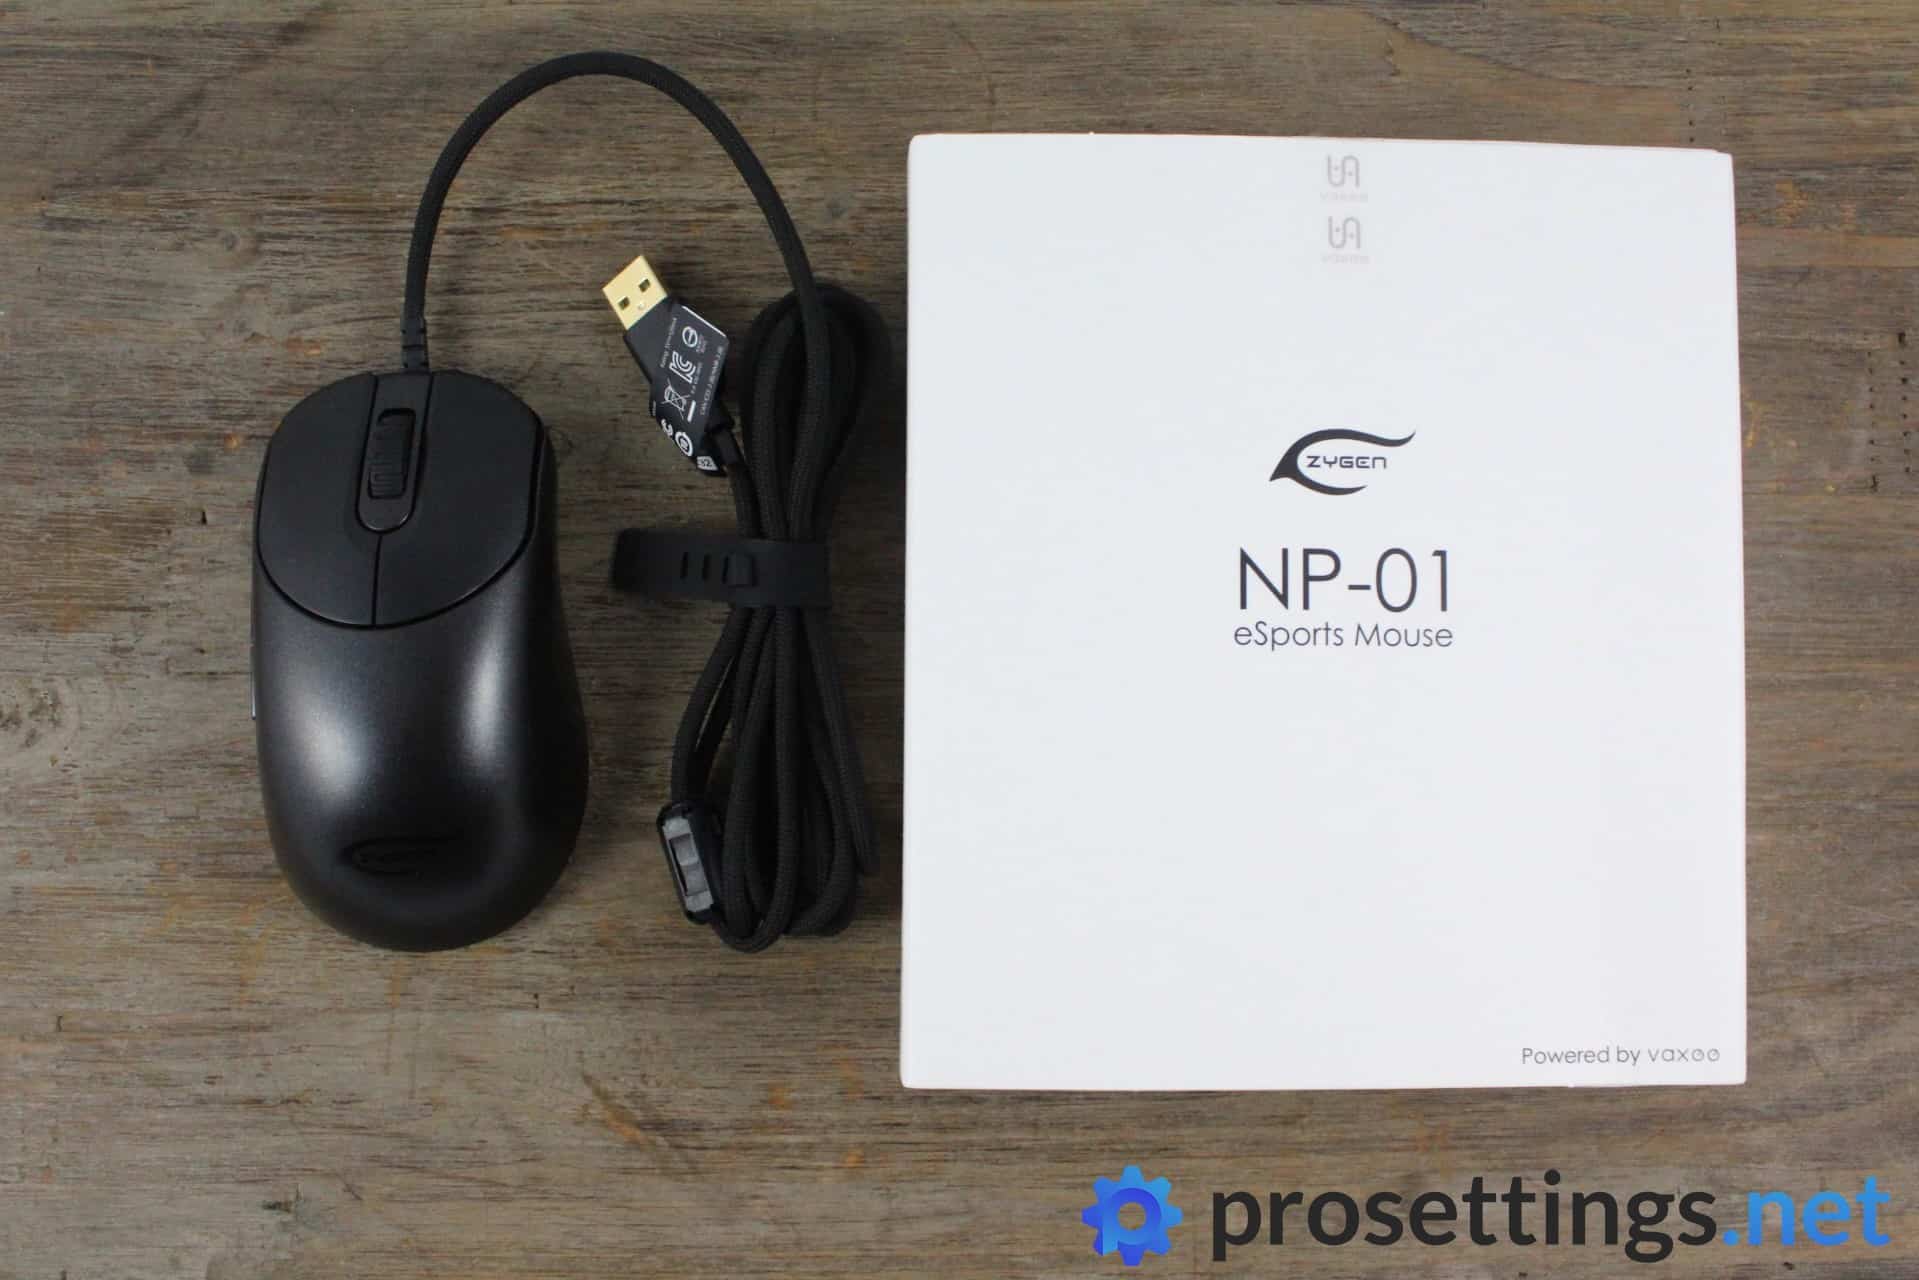 Vaxee Zygen NP-01 Mouse Review Packaging